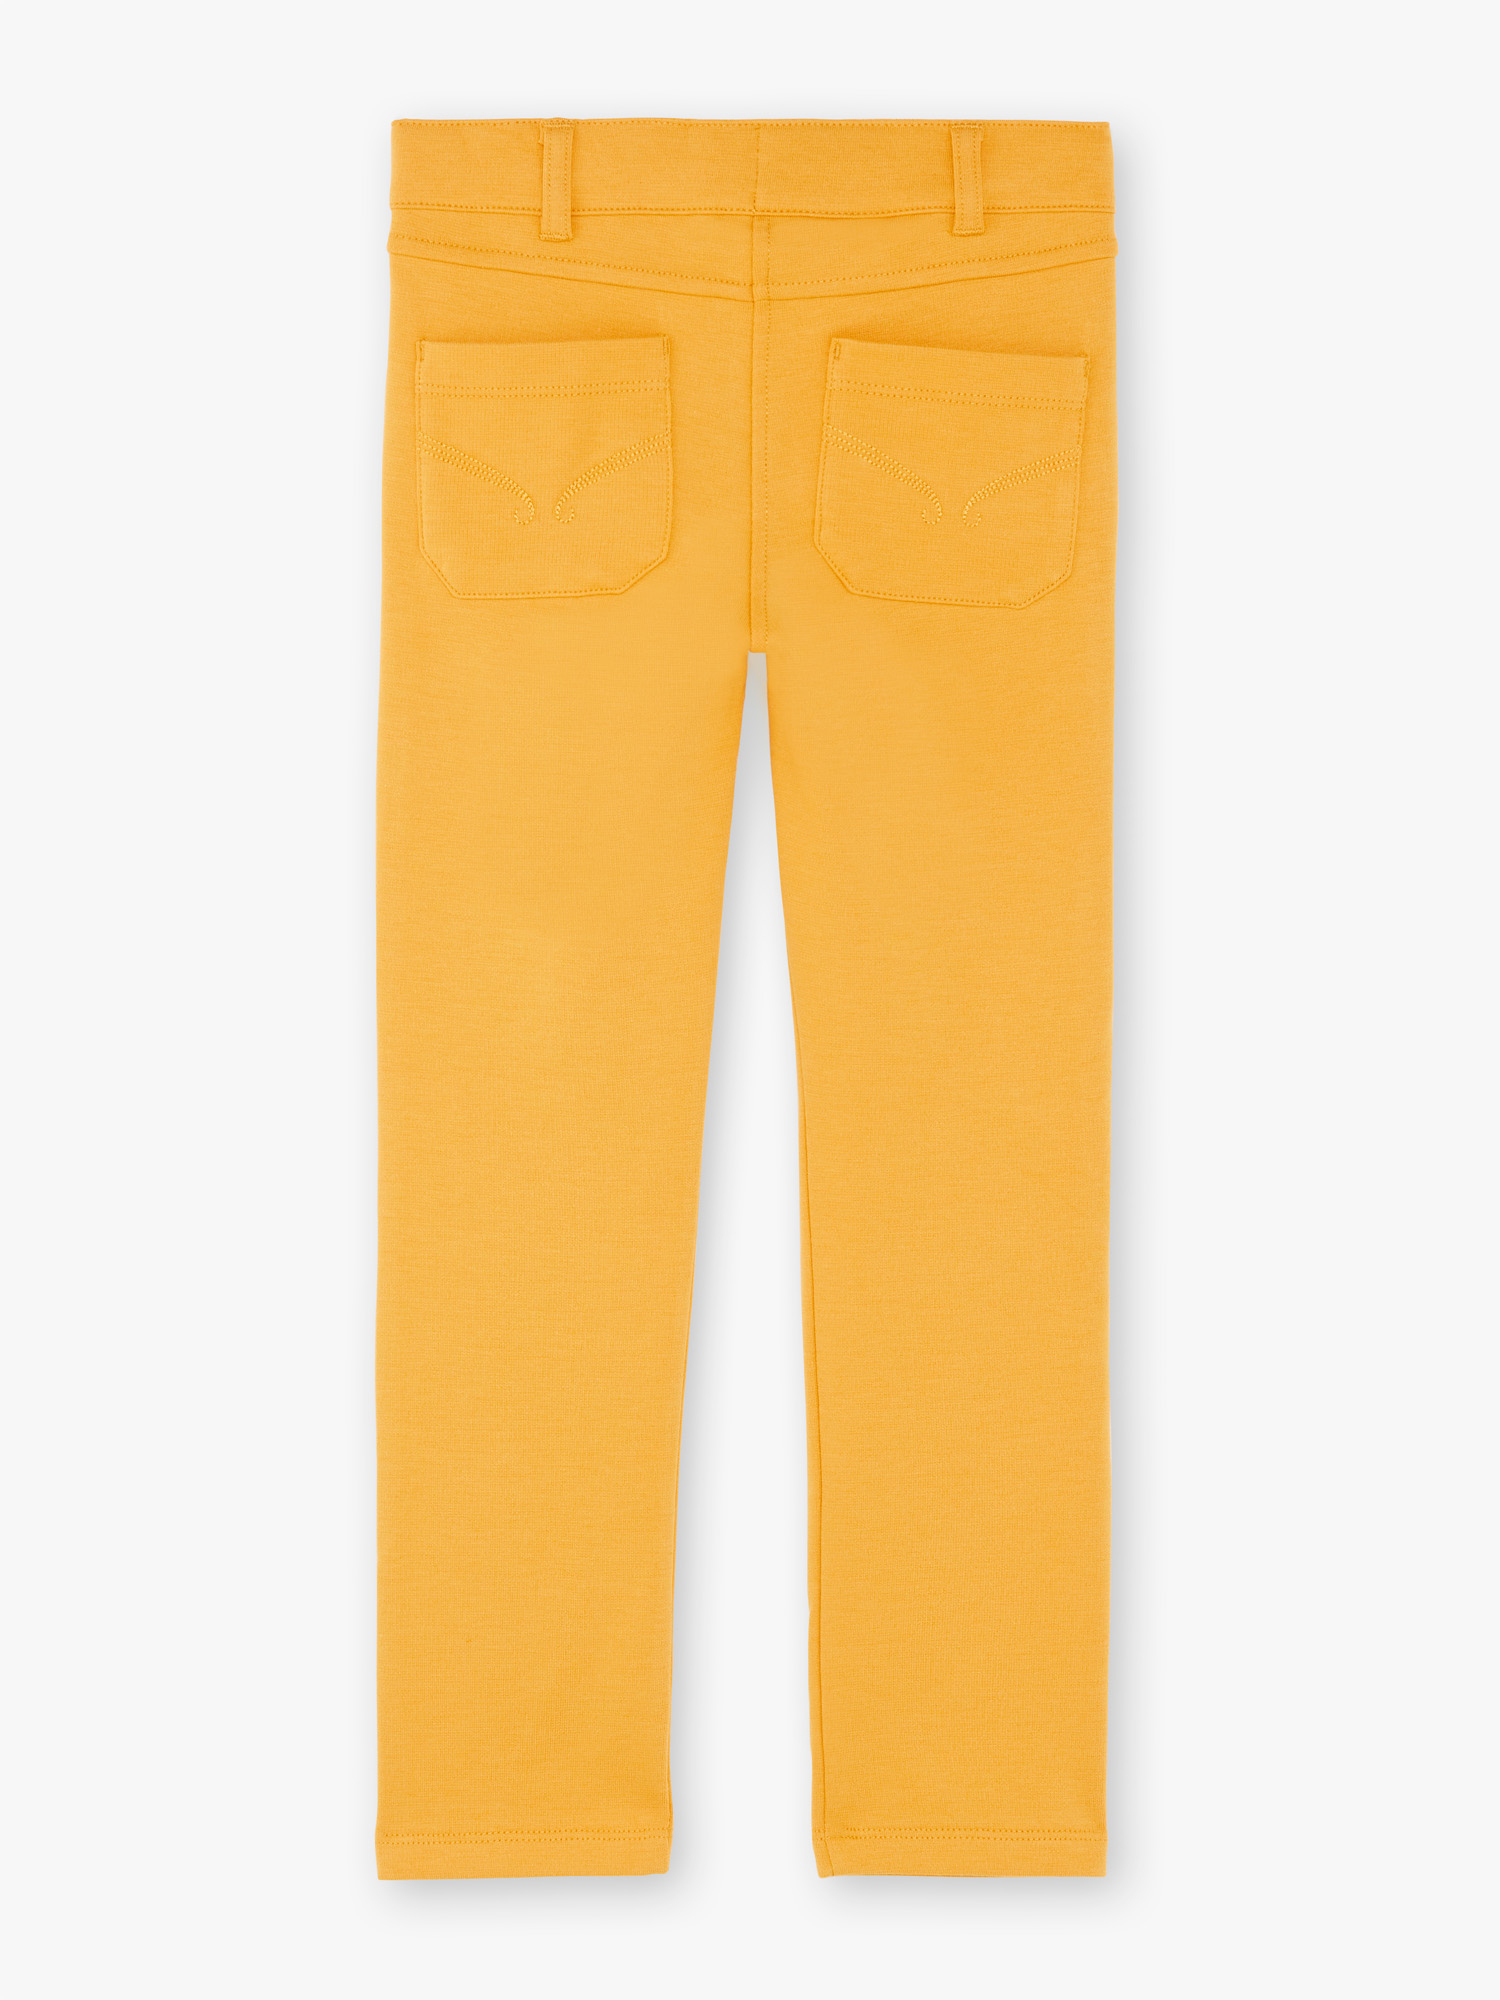 Pants child girl yellow : buy online - Trousers, Jeans and Legging ...